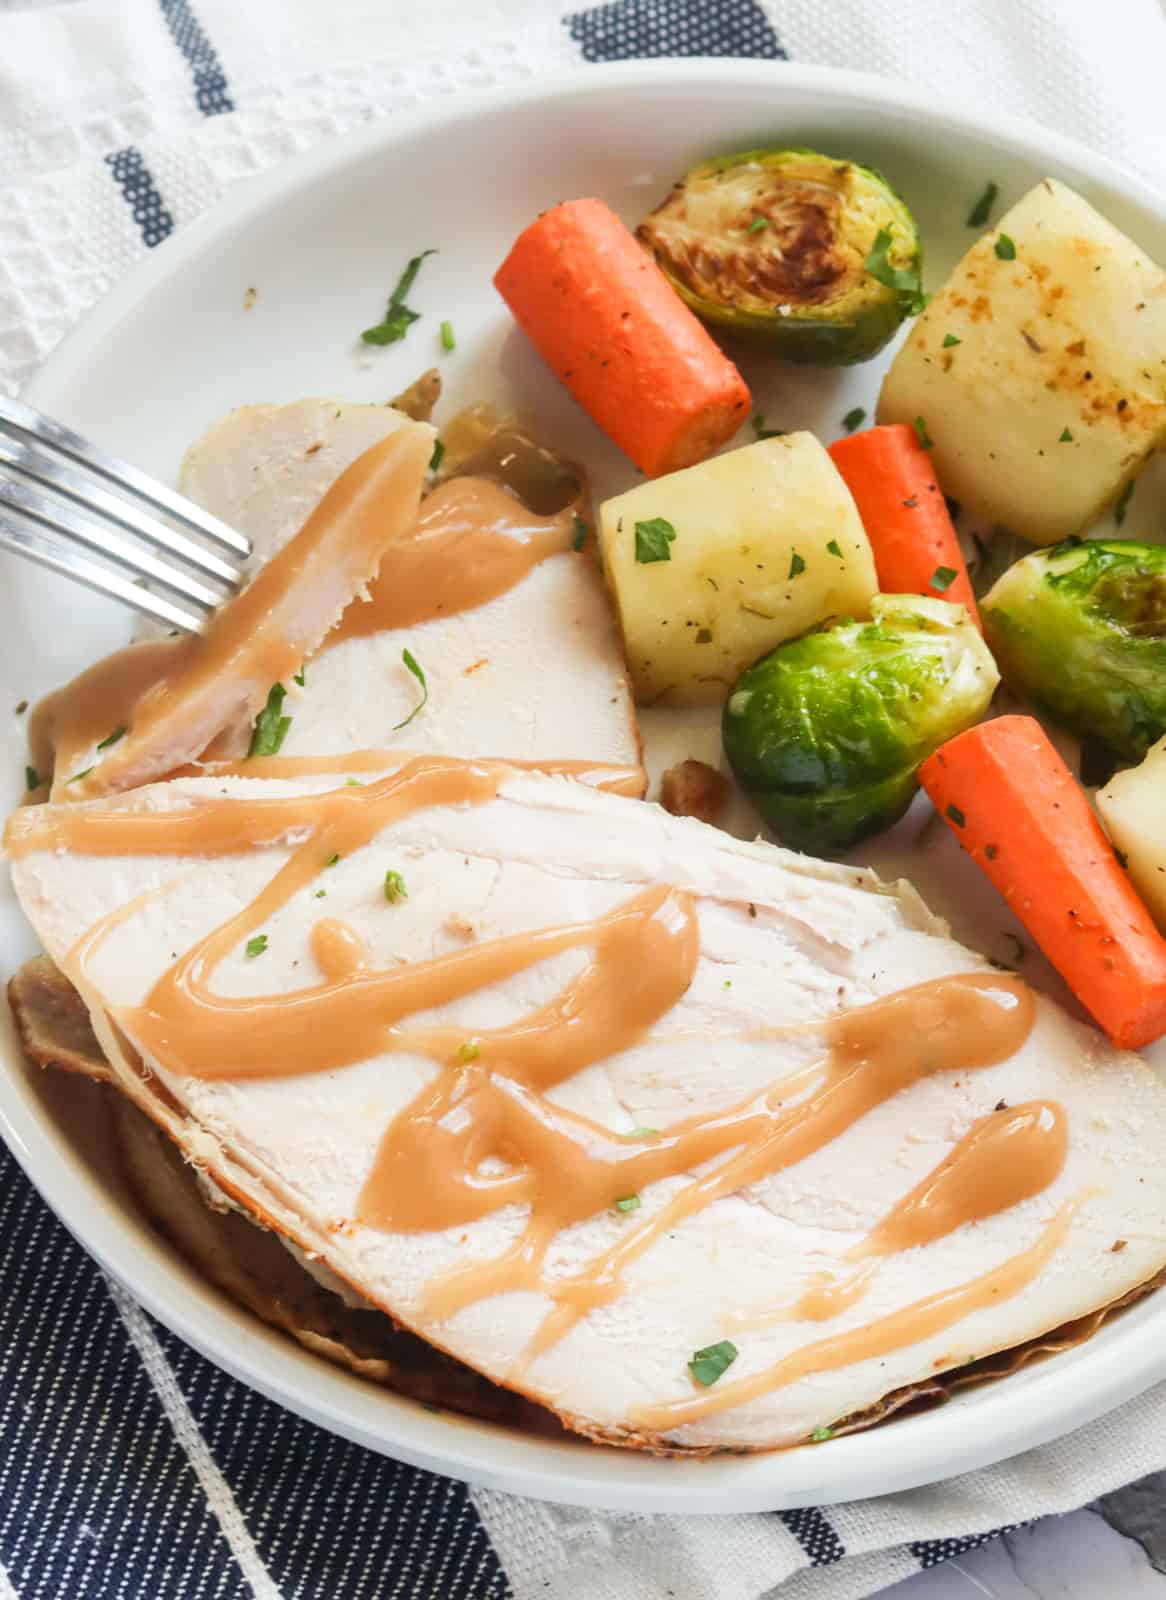 Enjoy roast turkey crown with veggies for an easy holiday